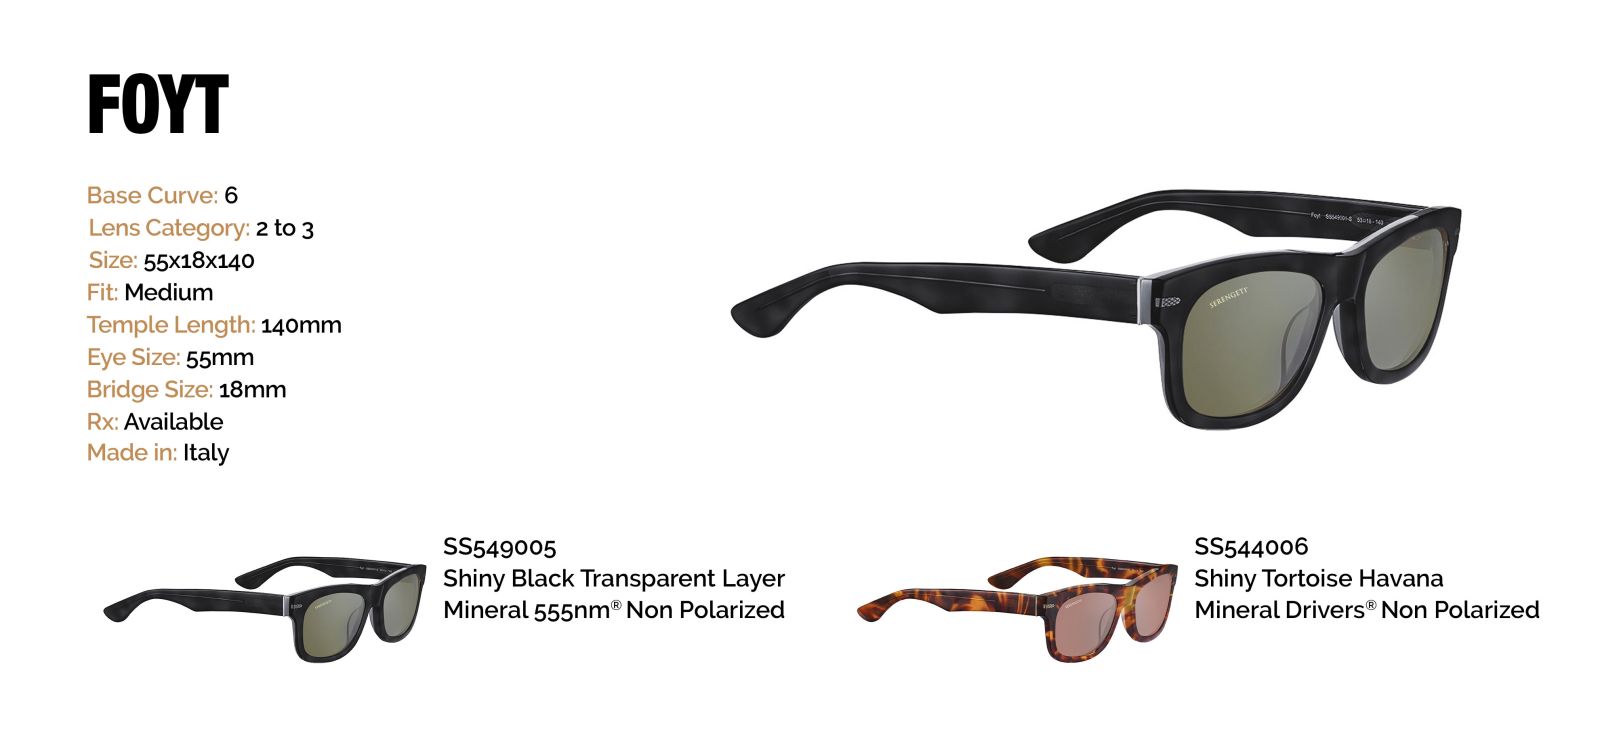 Bone Conduction Sunglasses - Not sold in stores